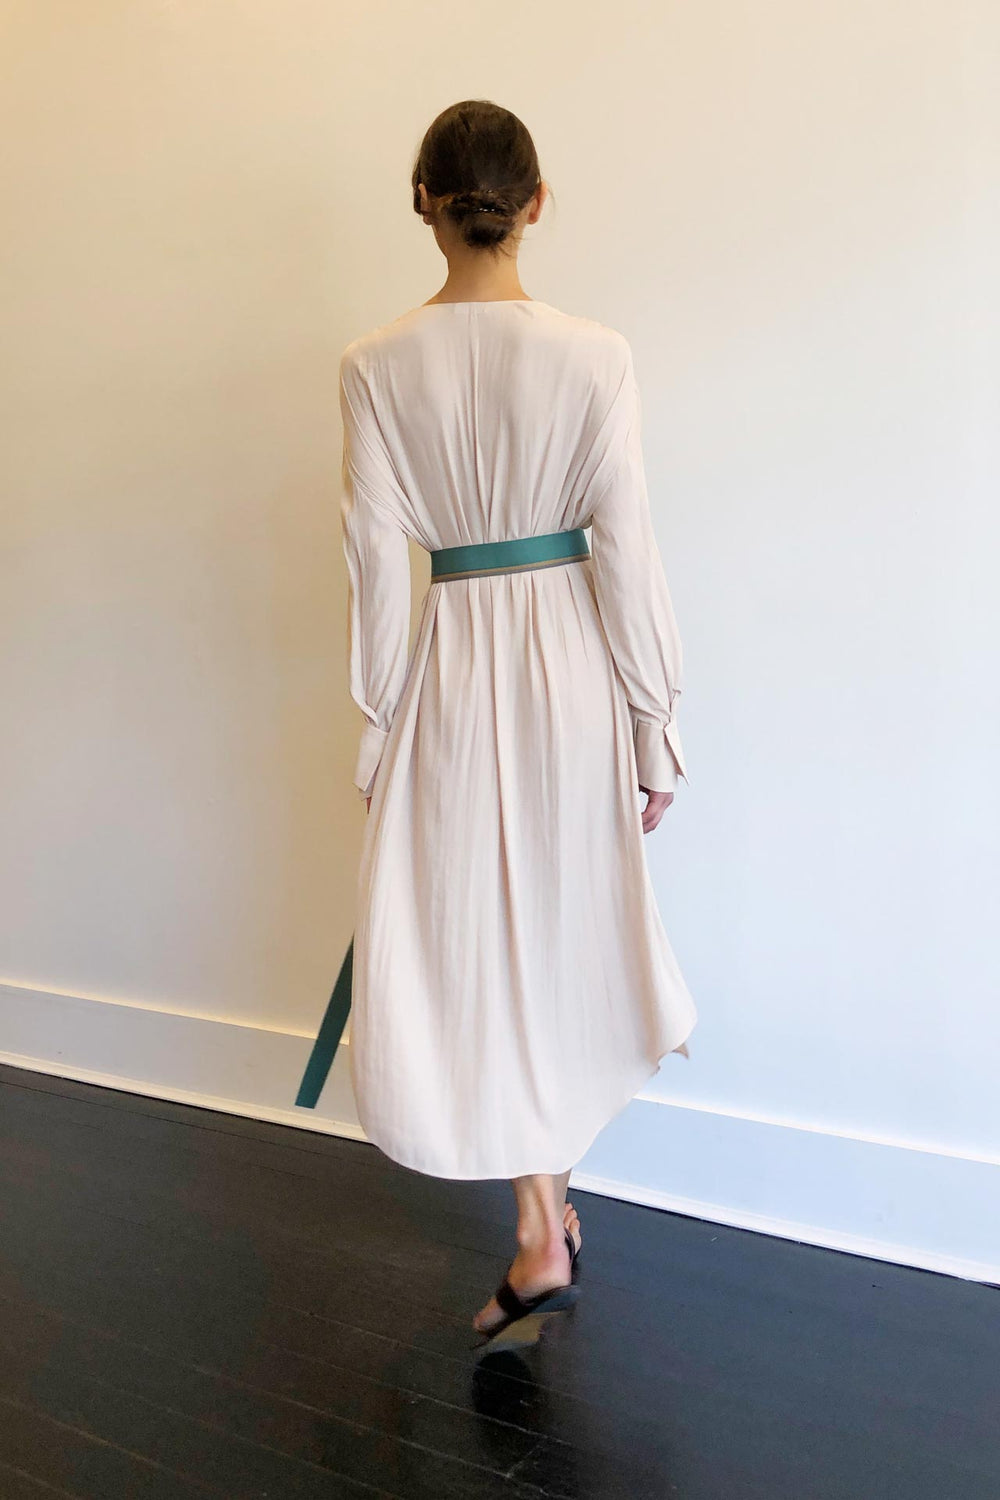 Fashion Designer CARL KAPP collection | Zil Pasyon Onesize Fits All cocktail White dress with sleeves | Sydney Australia